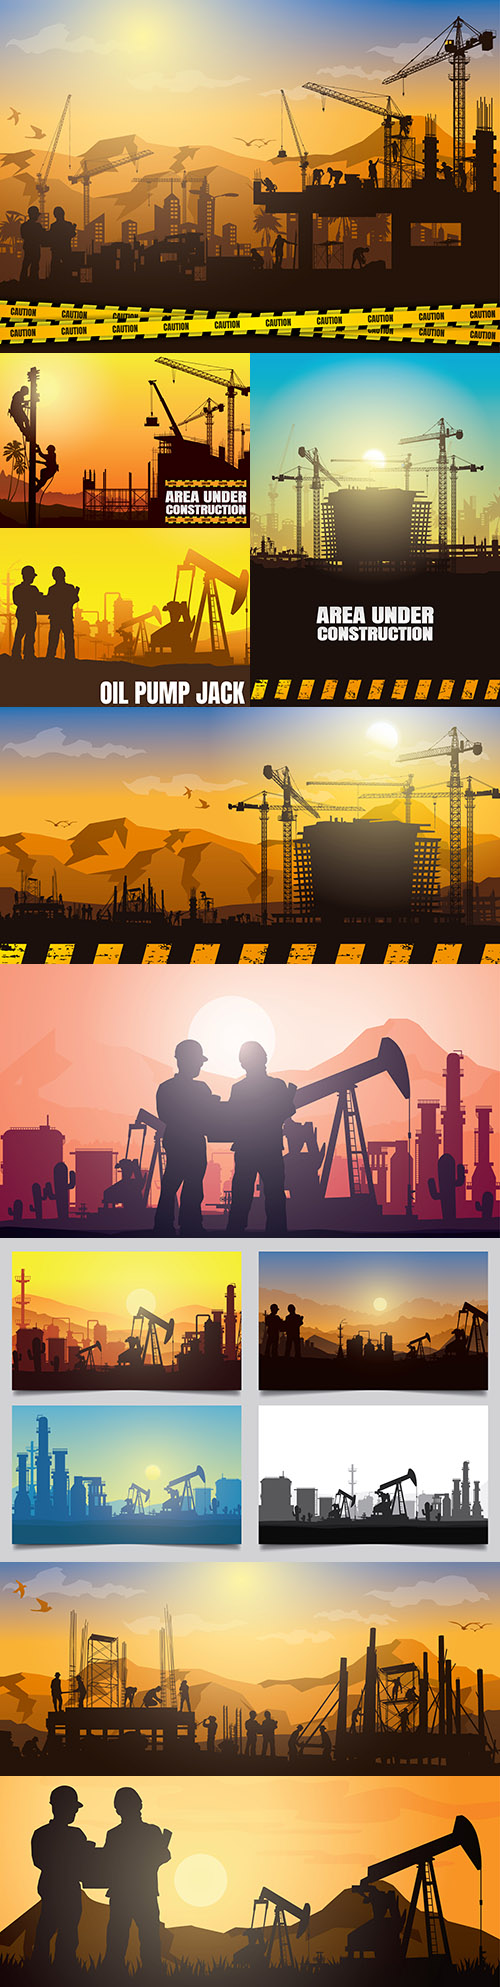 Oil rig and industry silhouettes background illustration
